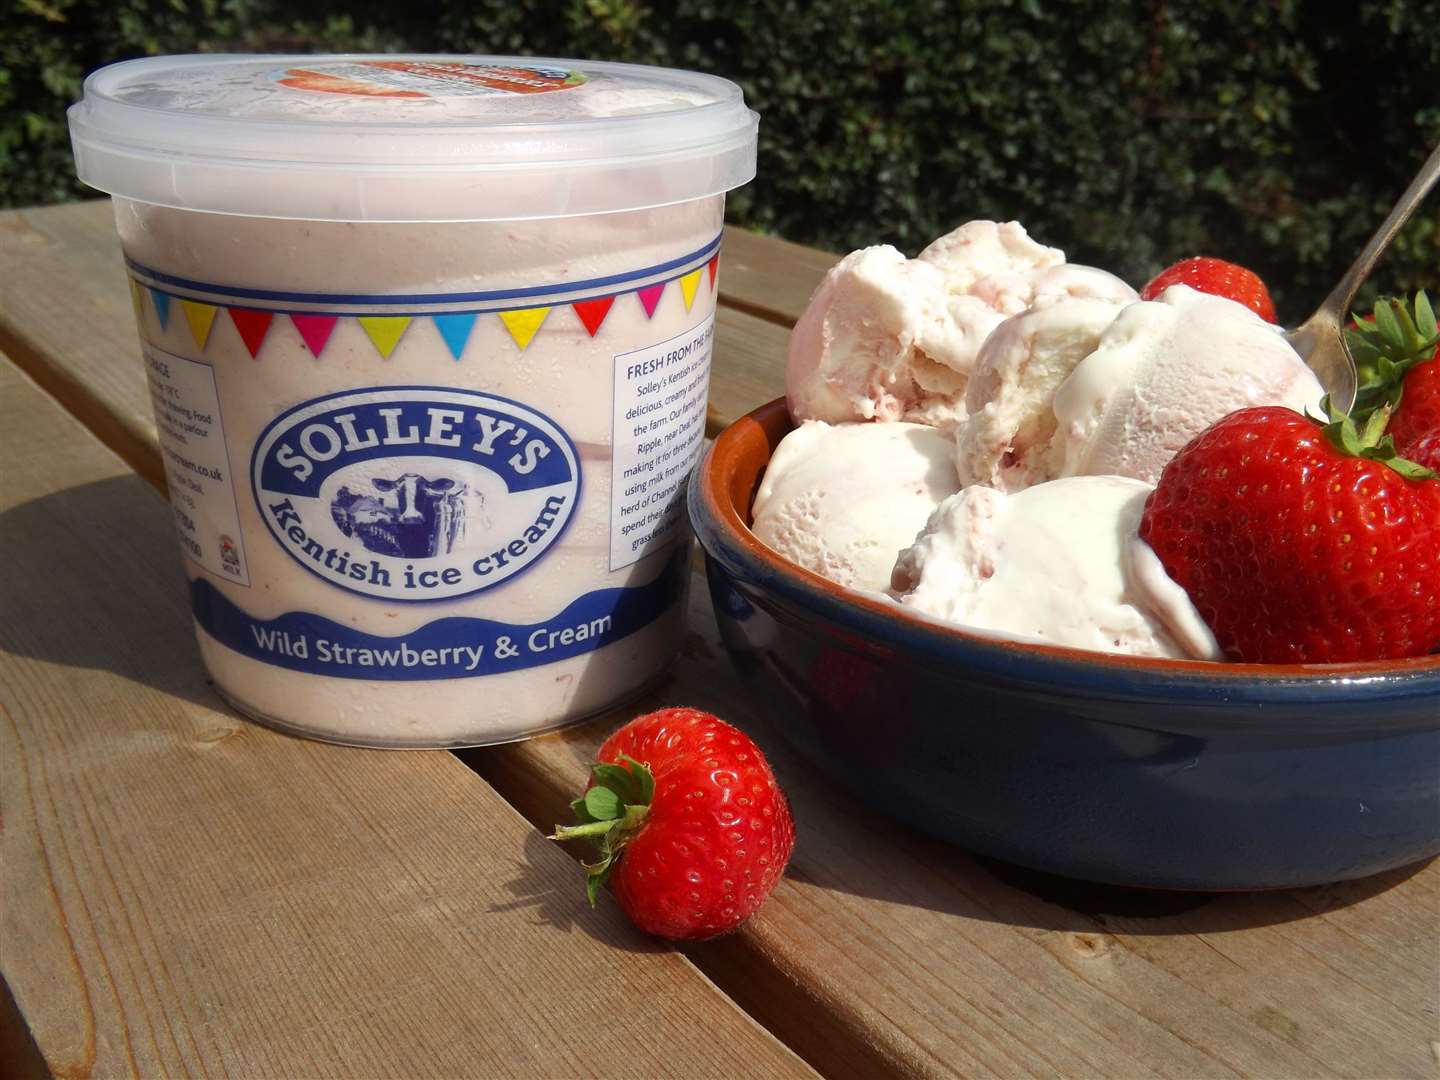 See The Dairy responsible for Solley's ice cream